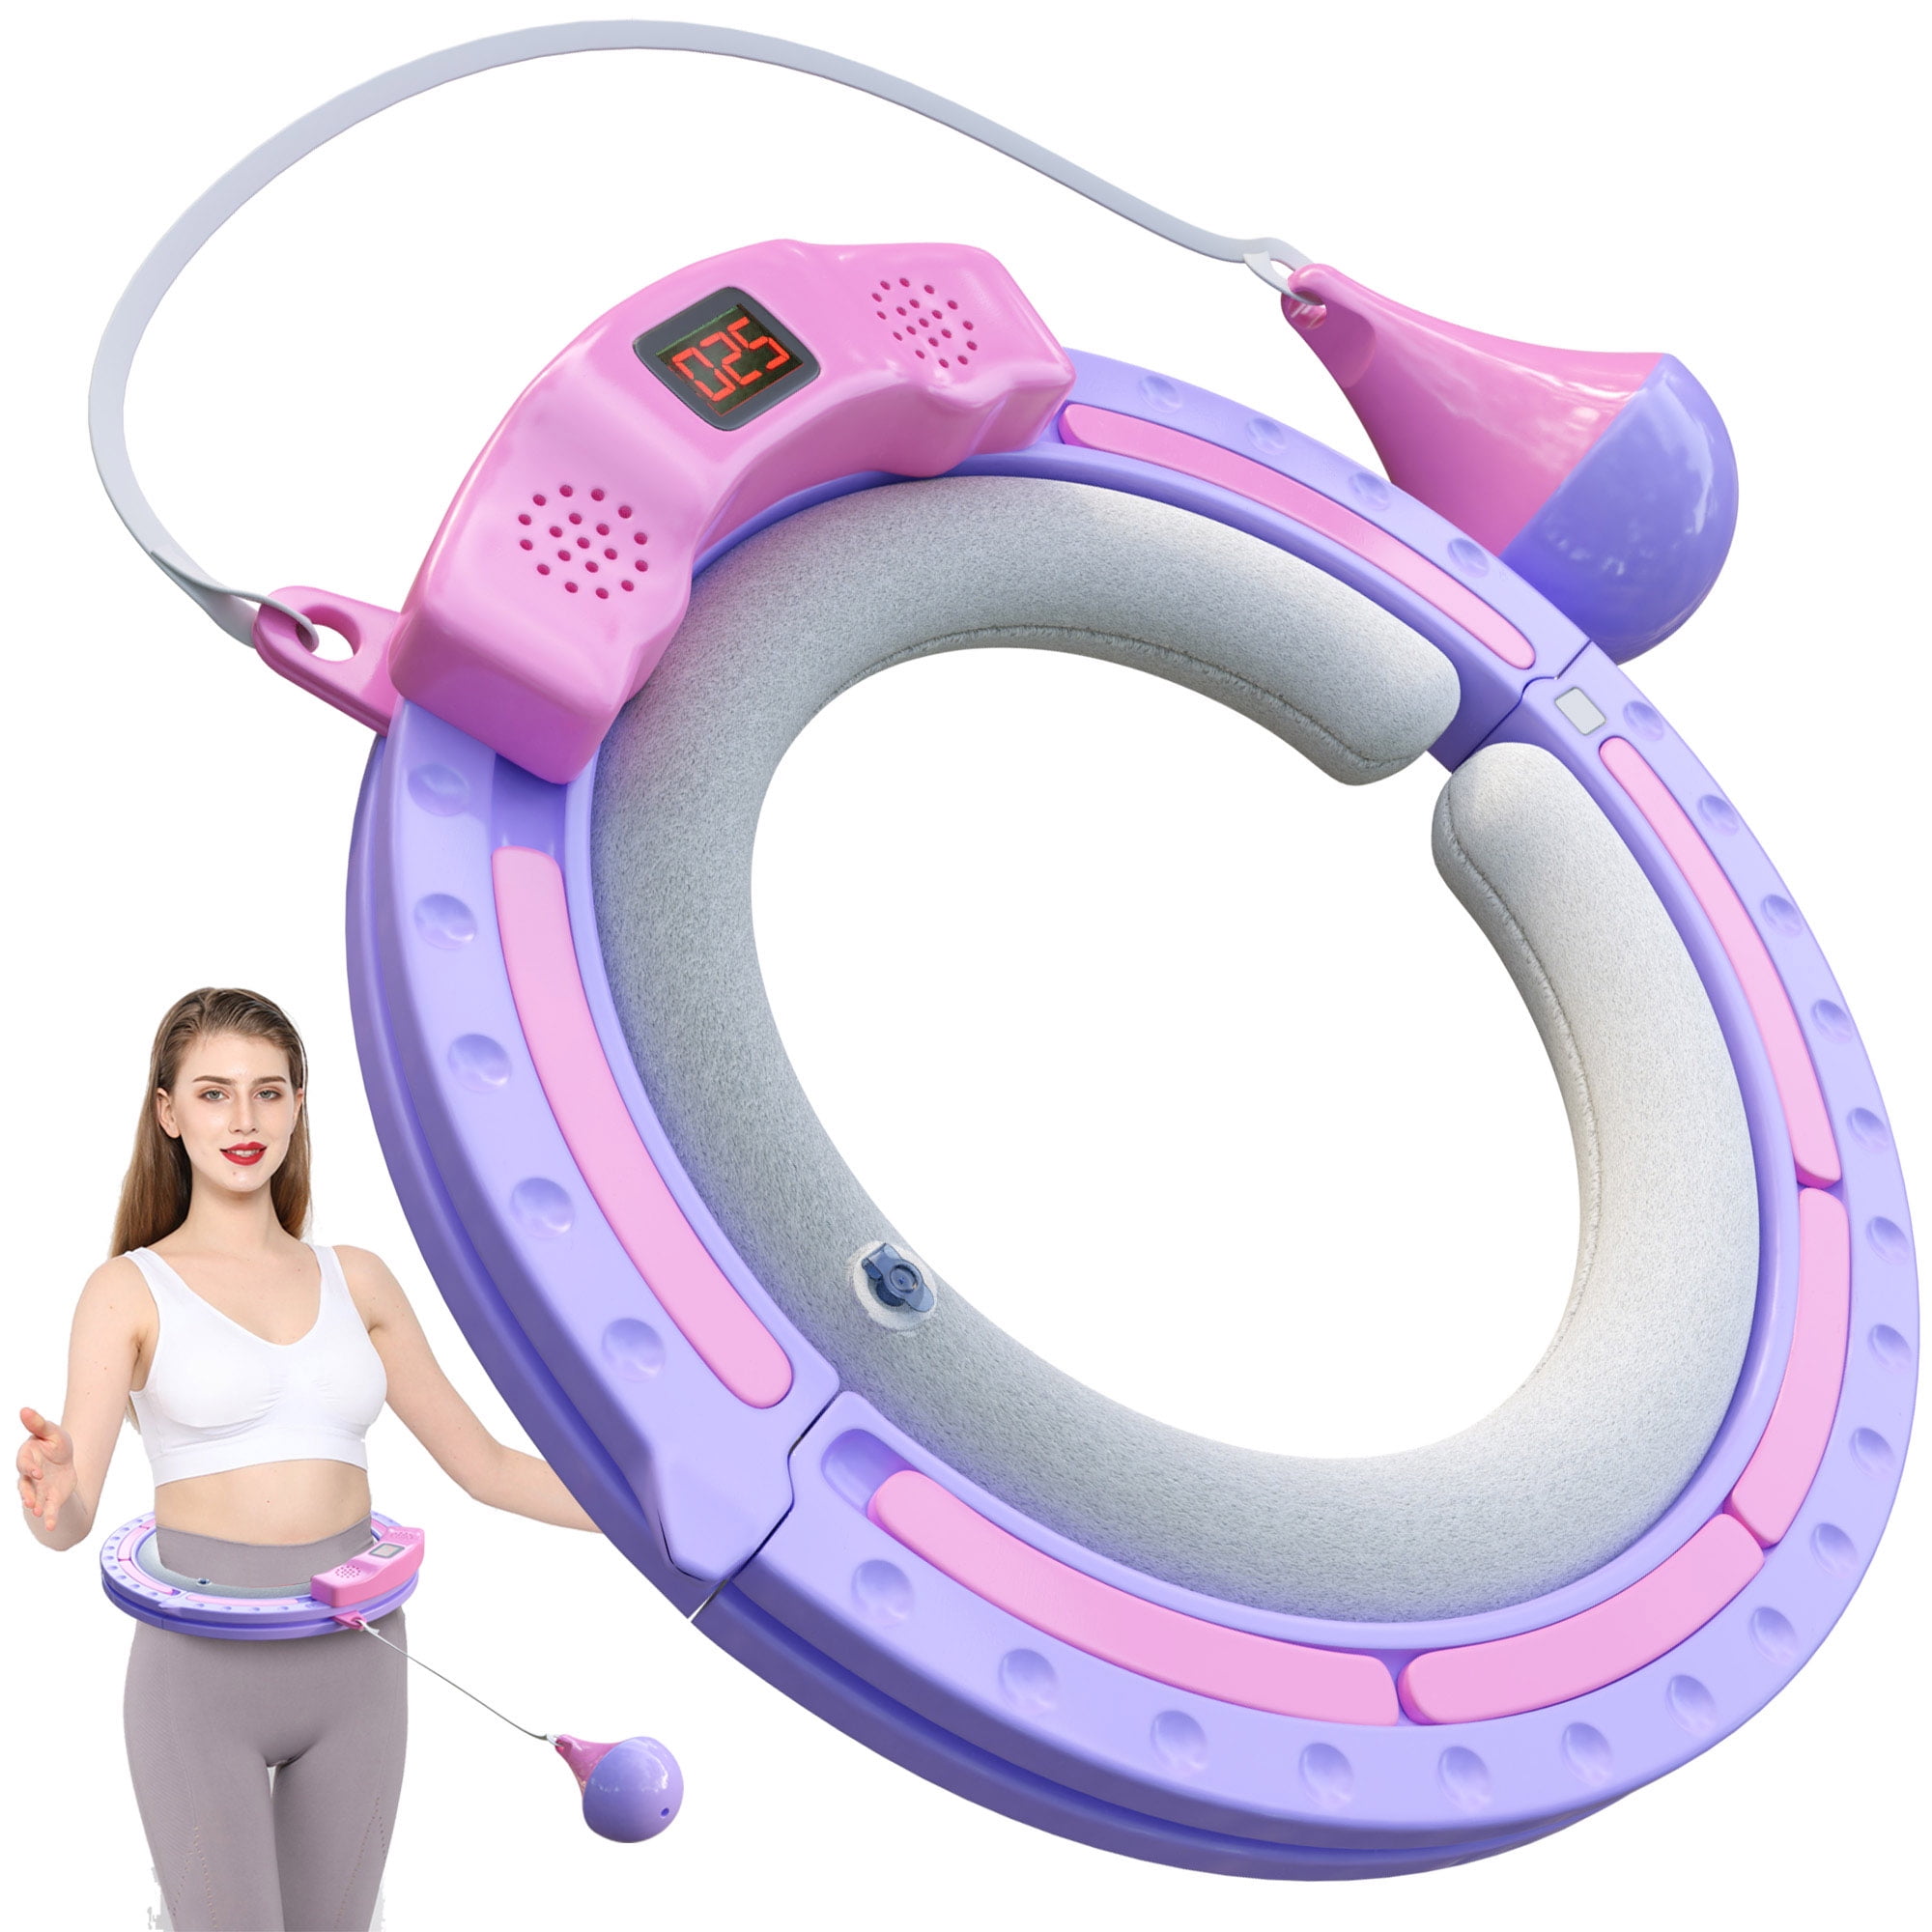 Zenmarkt Smart Weighted Hula Hoop for Adults - 8 Section Detachable  Exercise Hula Hoop for Women, Soft Padded Exercise Hoop, Portable and  Adjustable